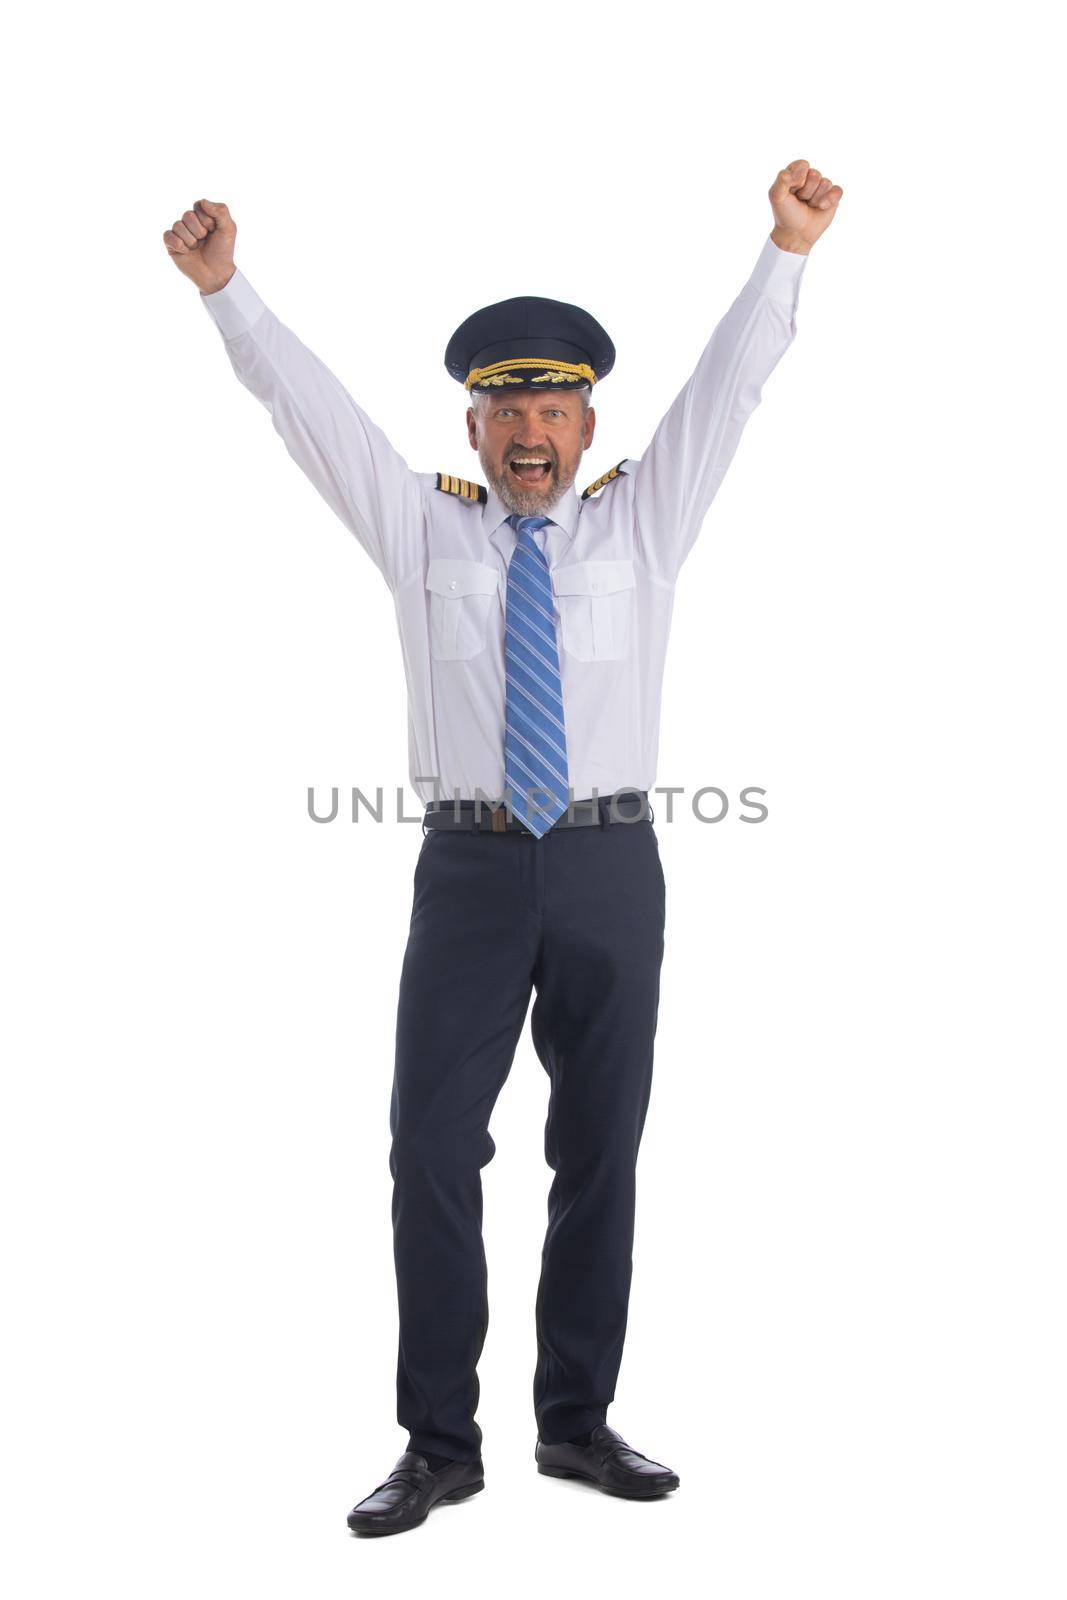 Airline pilot holds up his arms by ALotOfPeople